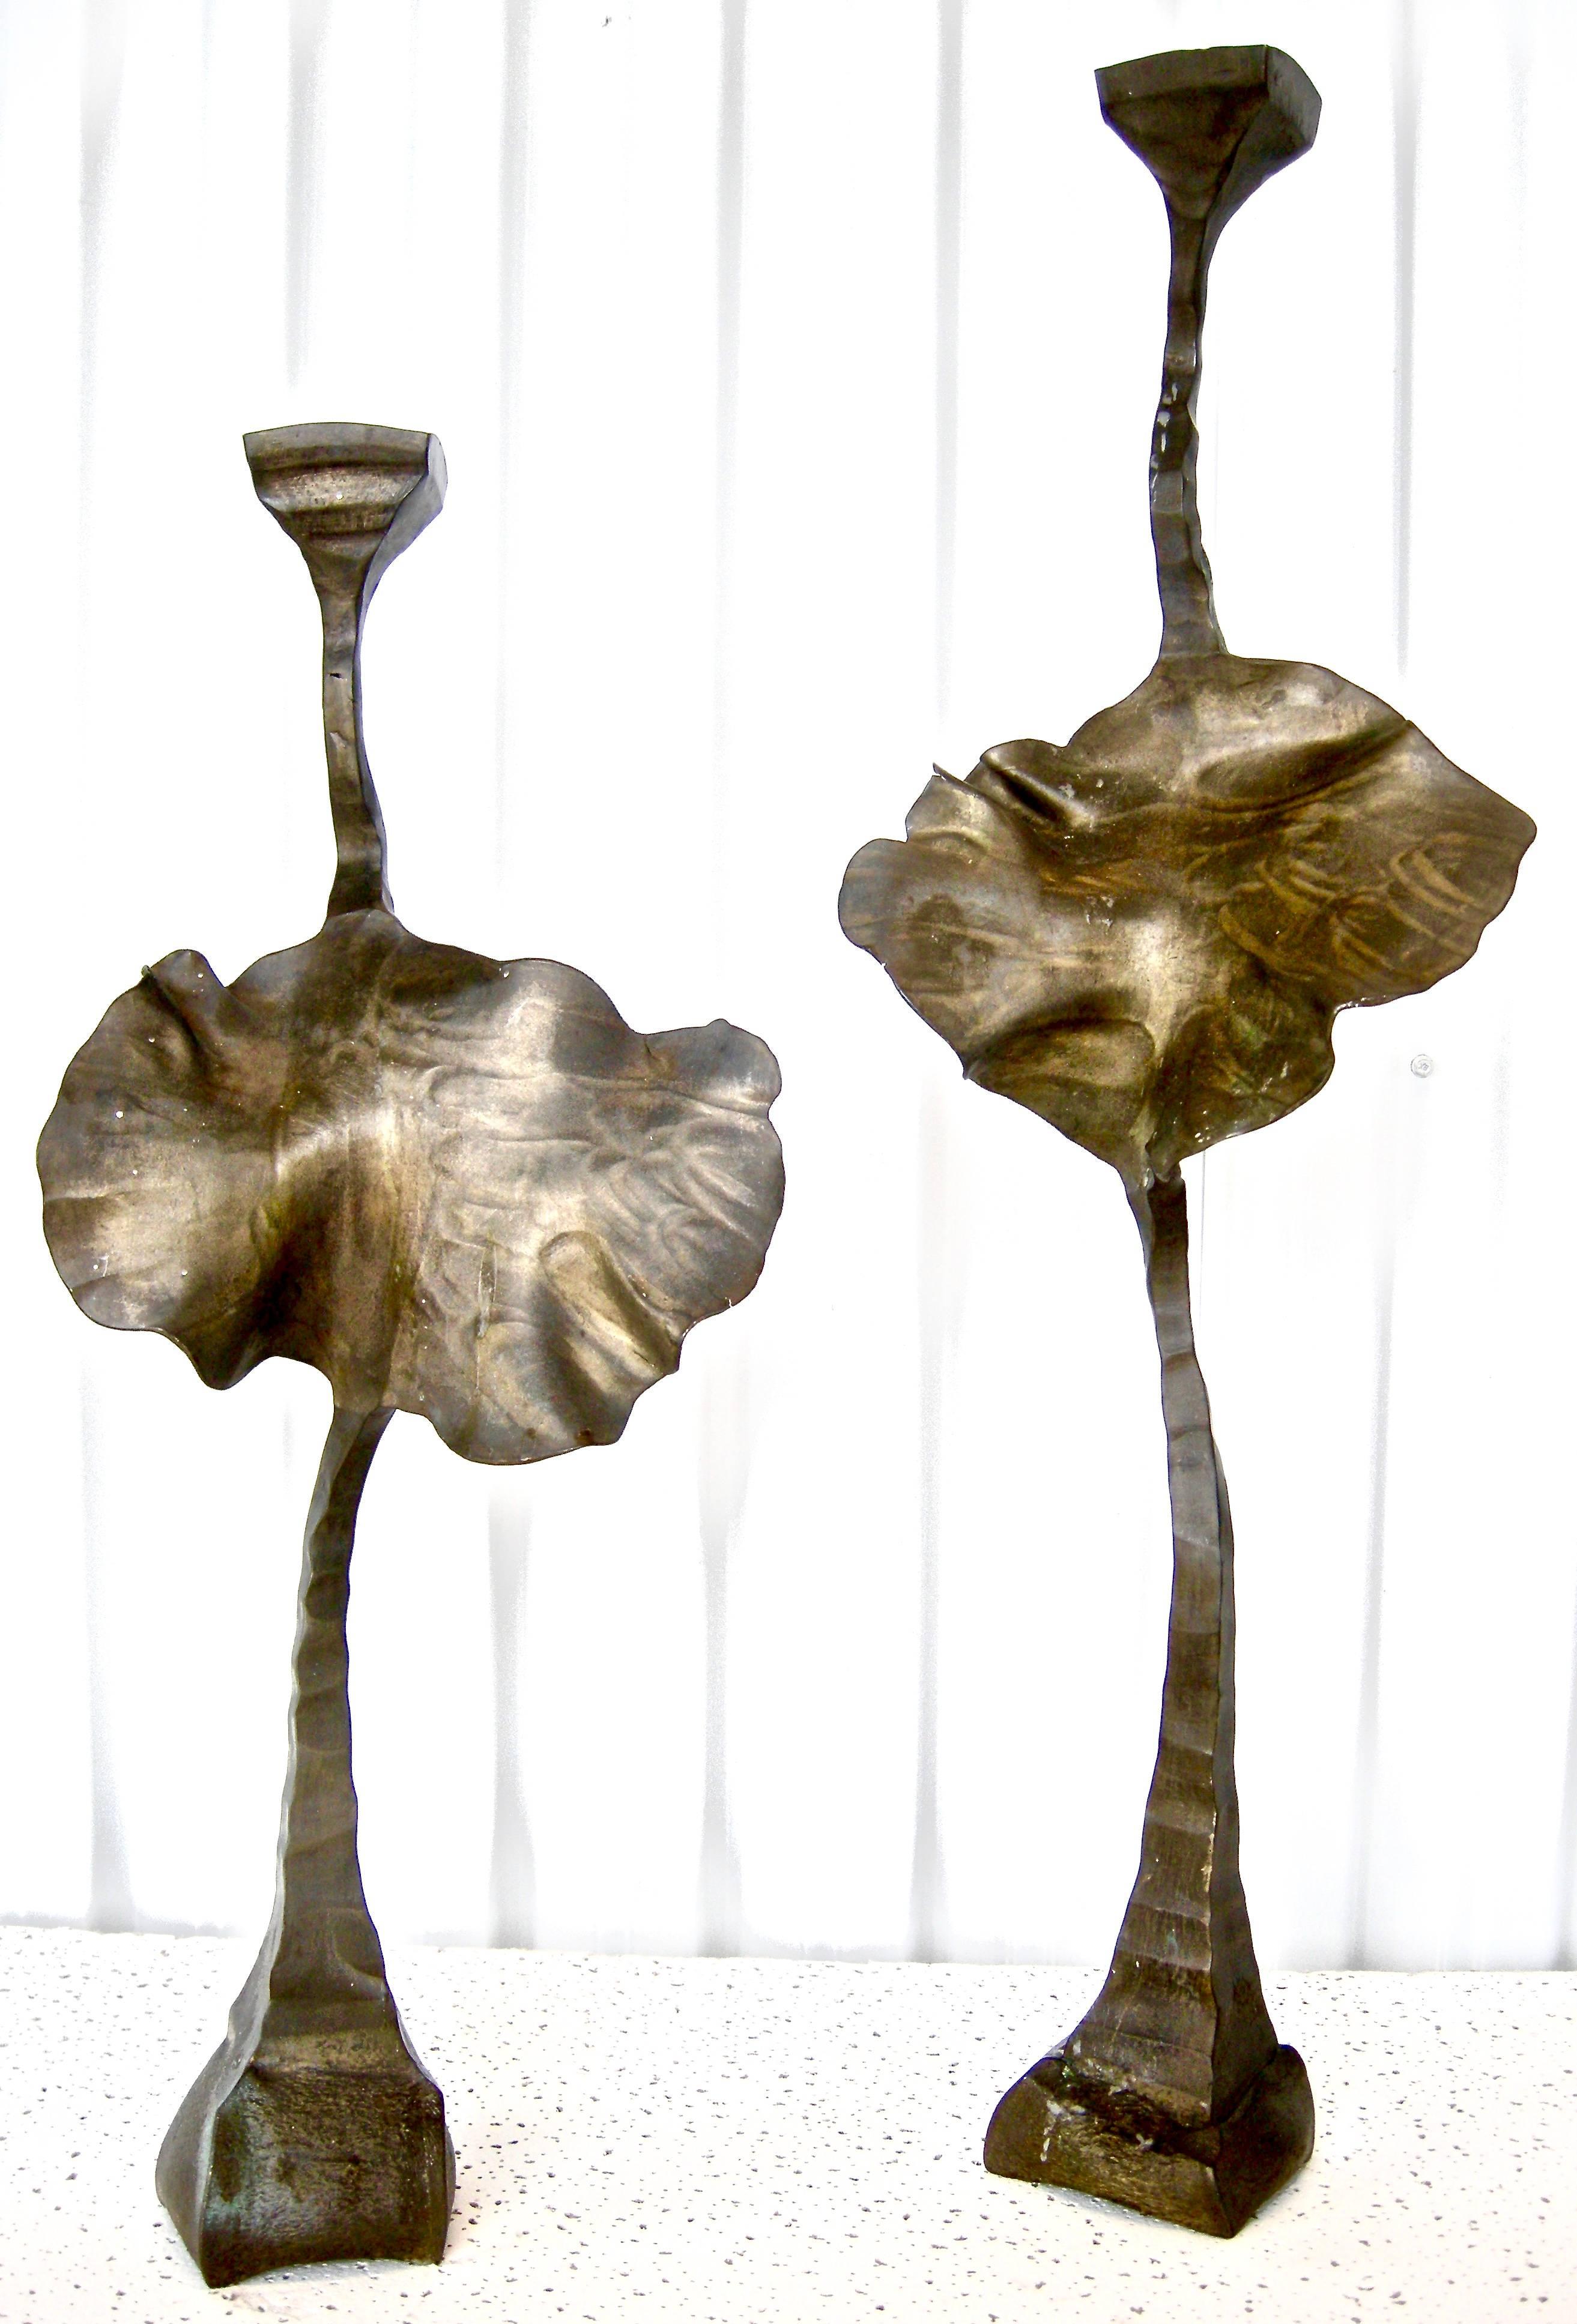 Striking pair of vintage, bronze, candleholders having abstract lotus leaf motifs. Artisan hand cast and designed in  semi-brutalist style, shape and forms. Warm time-worn surface and patinas. Initial signed. 1989 dated. Aesthetic and visually